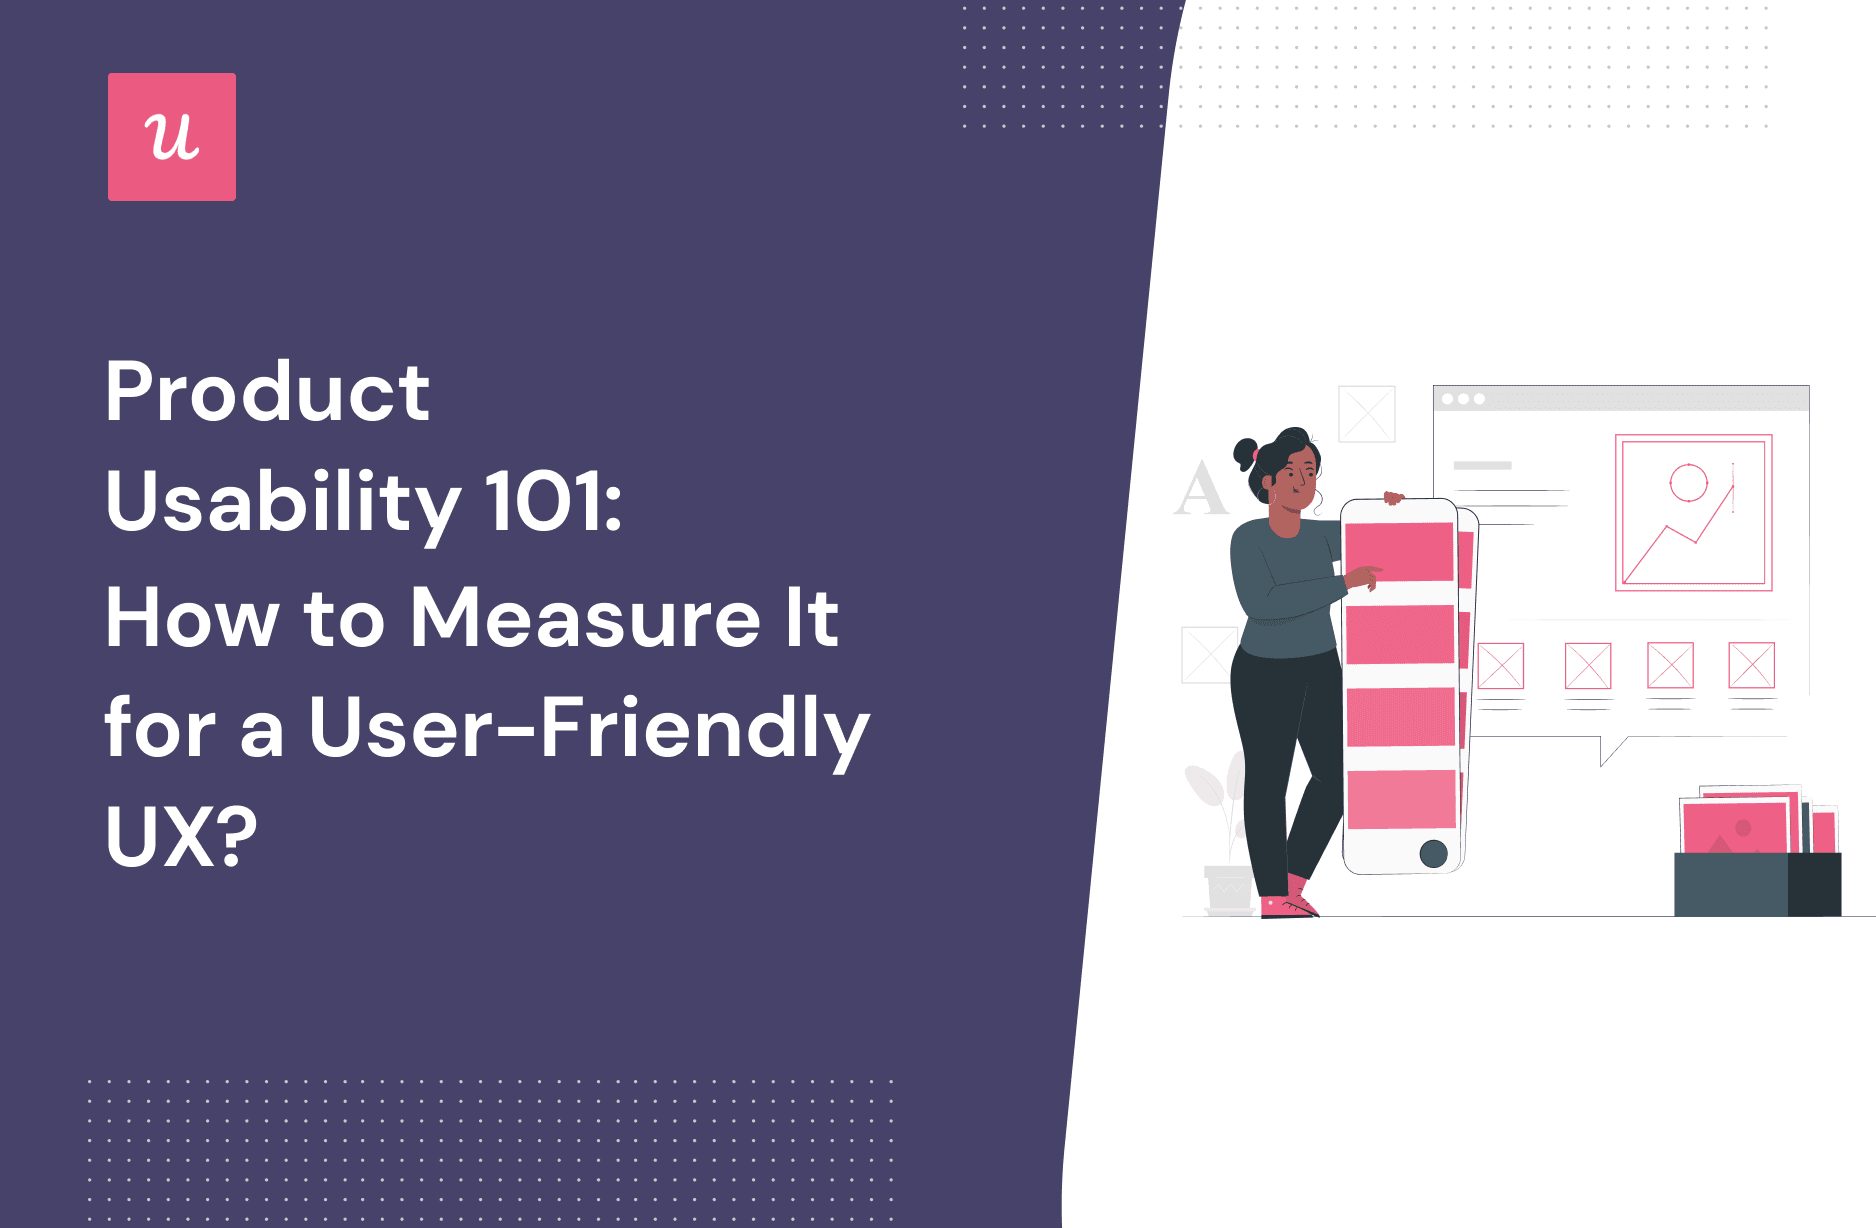 Product Usability 101: How to Measure It for a User-Friendly UX? cover